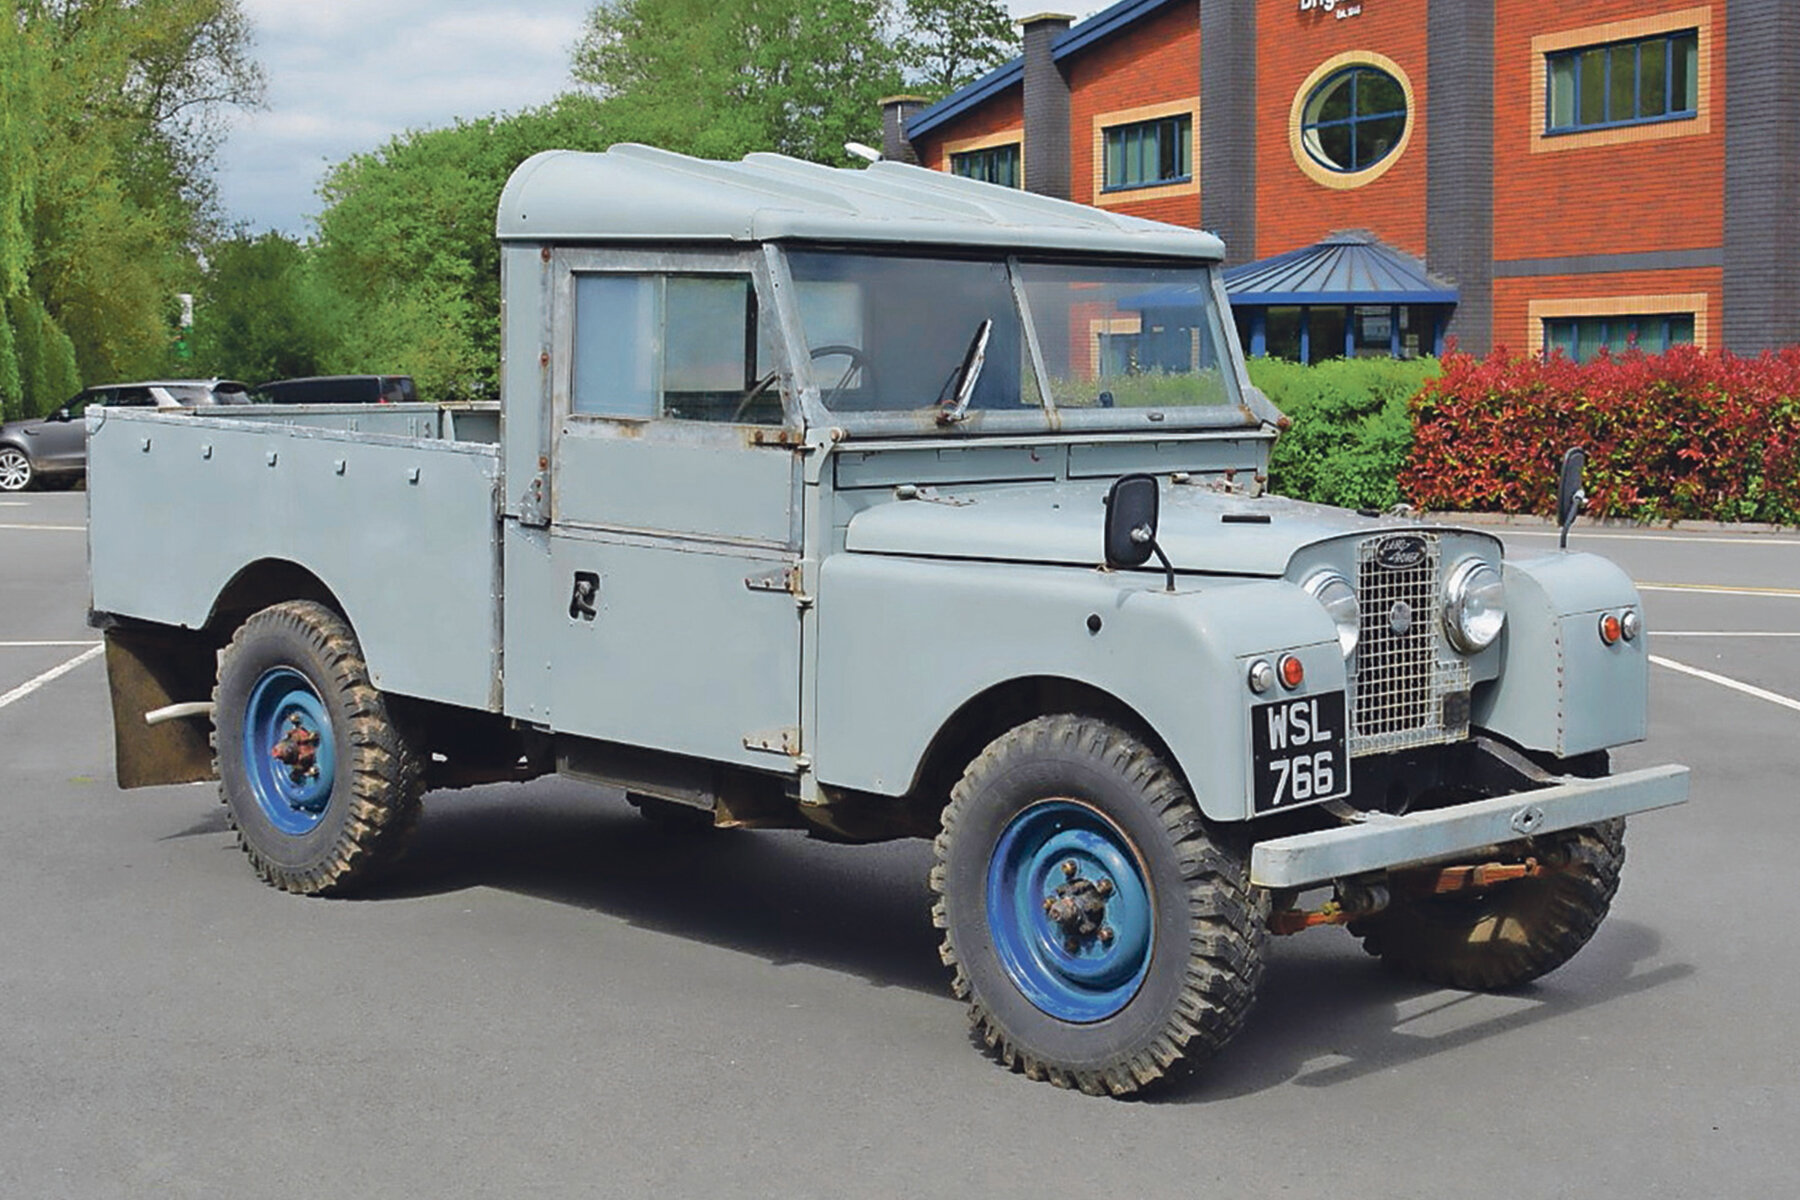 Land Rover Diesel was sold for a very reasonable £9250 at Brightwells